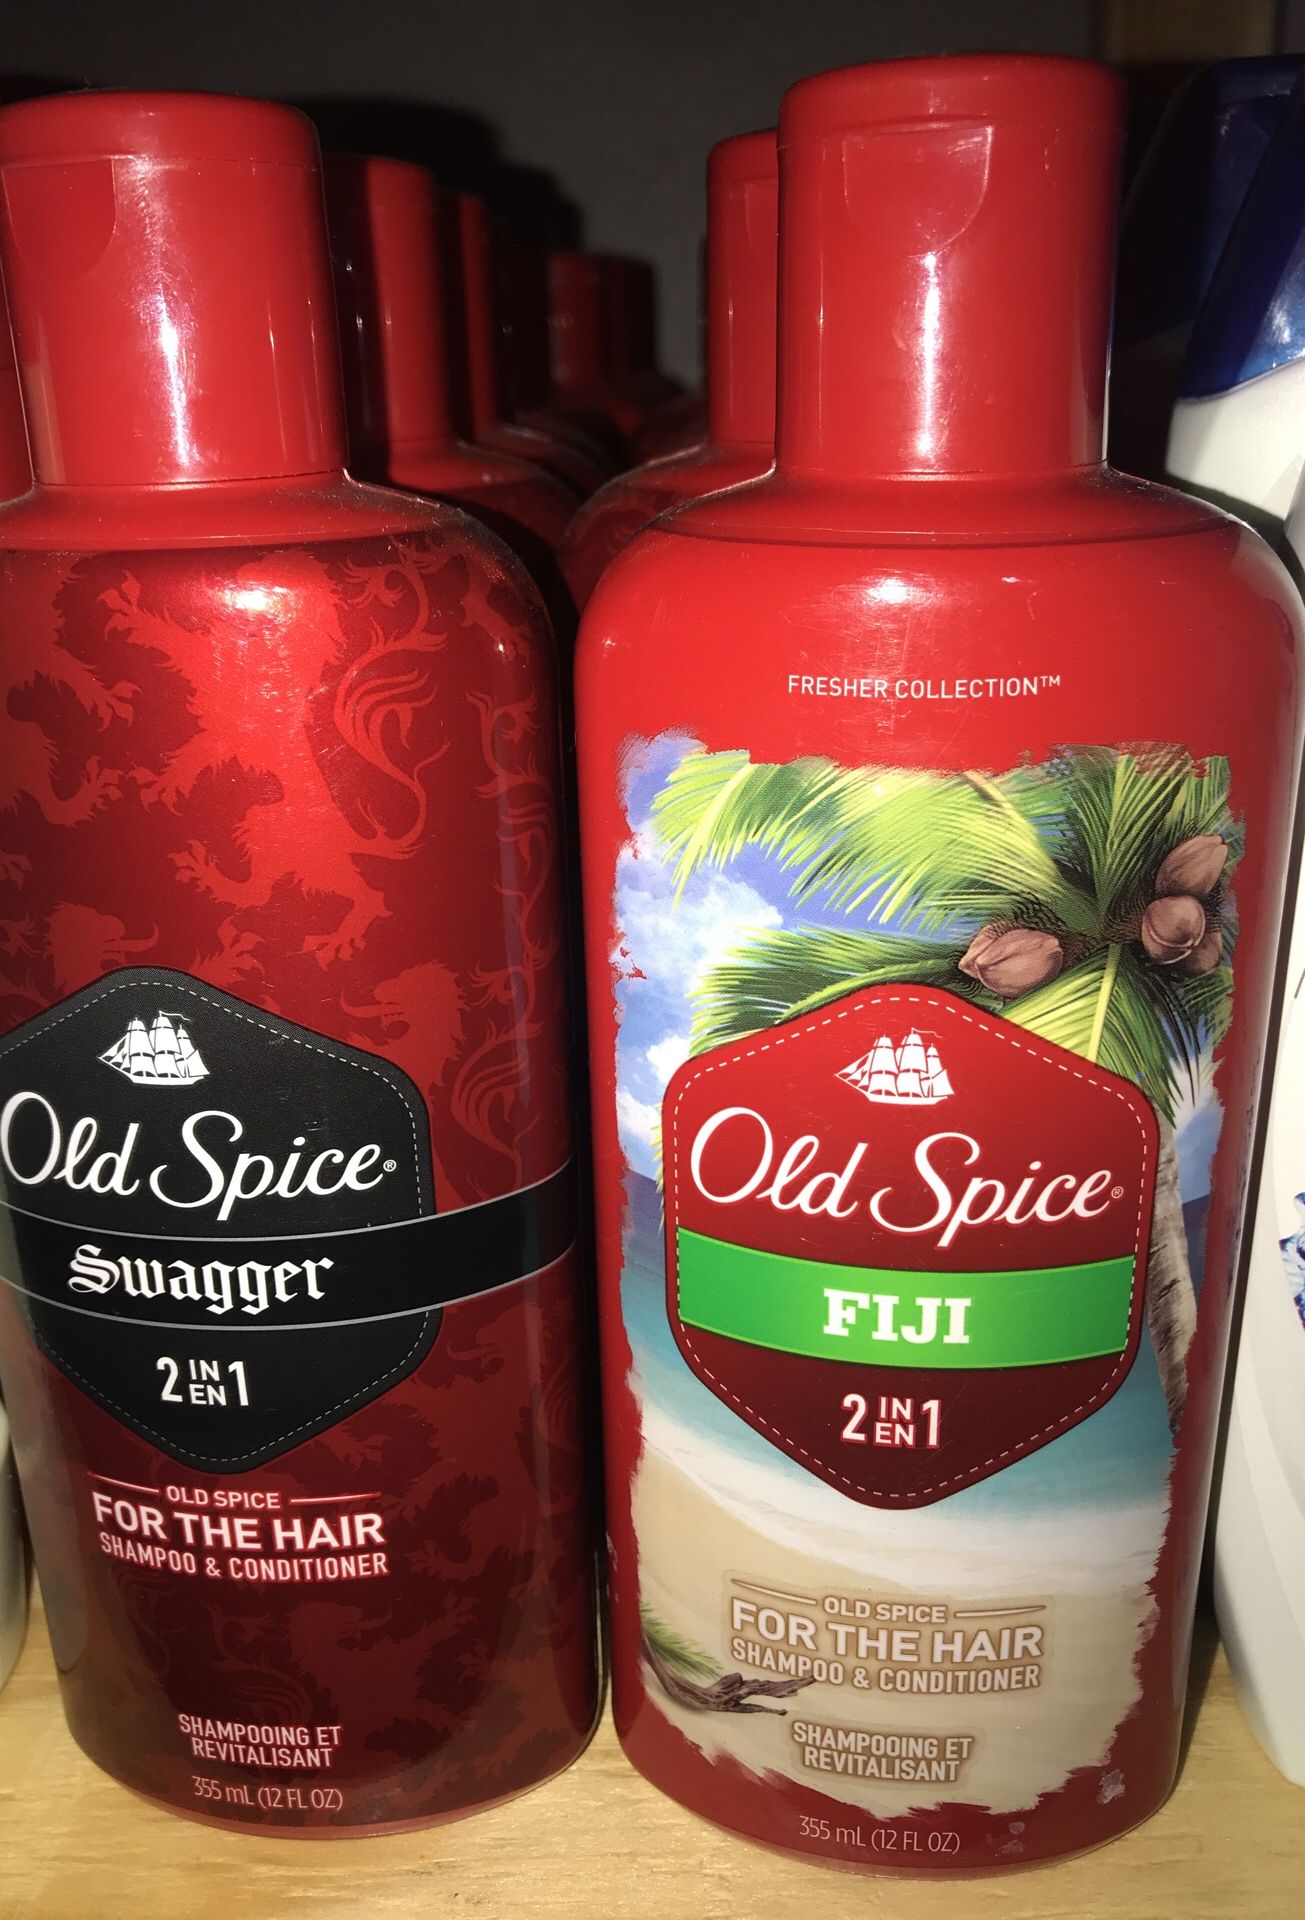 Old spice Shampoo and Conditioner of 12 oz for $2 each